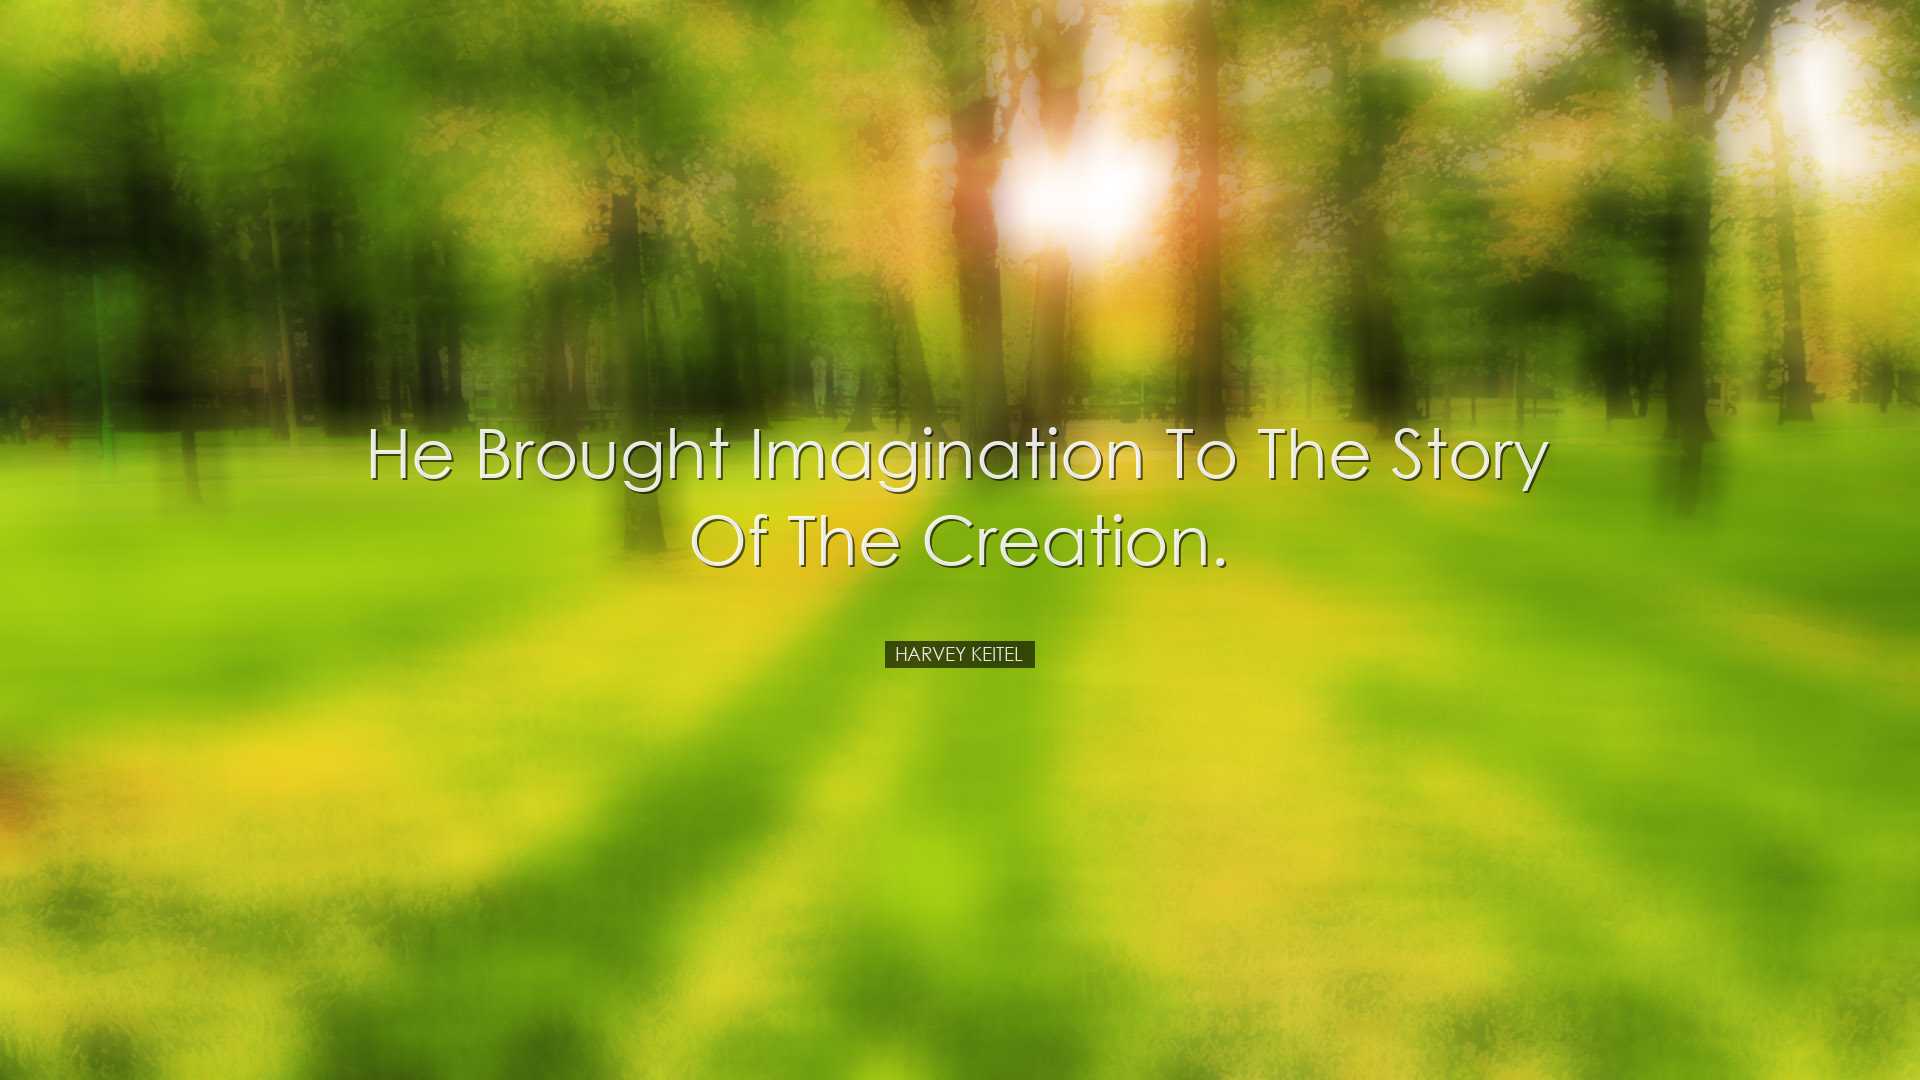 He brought imagination to the story of the Creation. - Harvey Keit